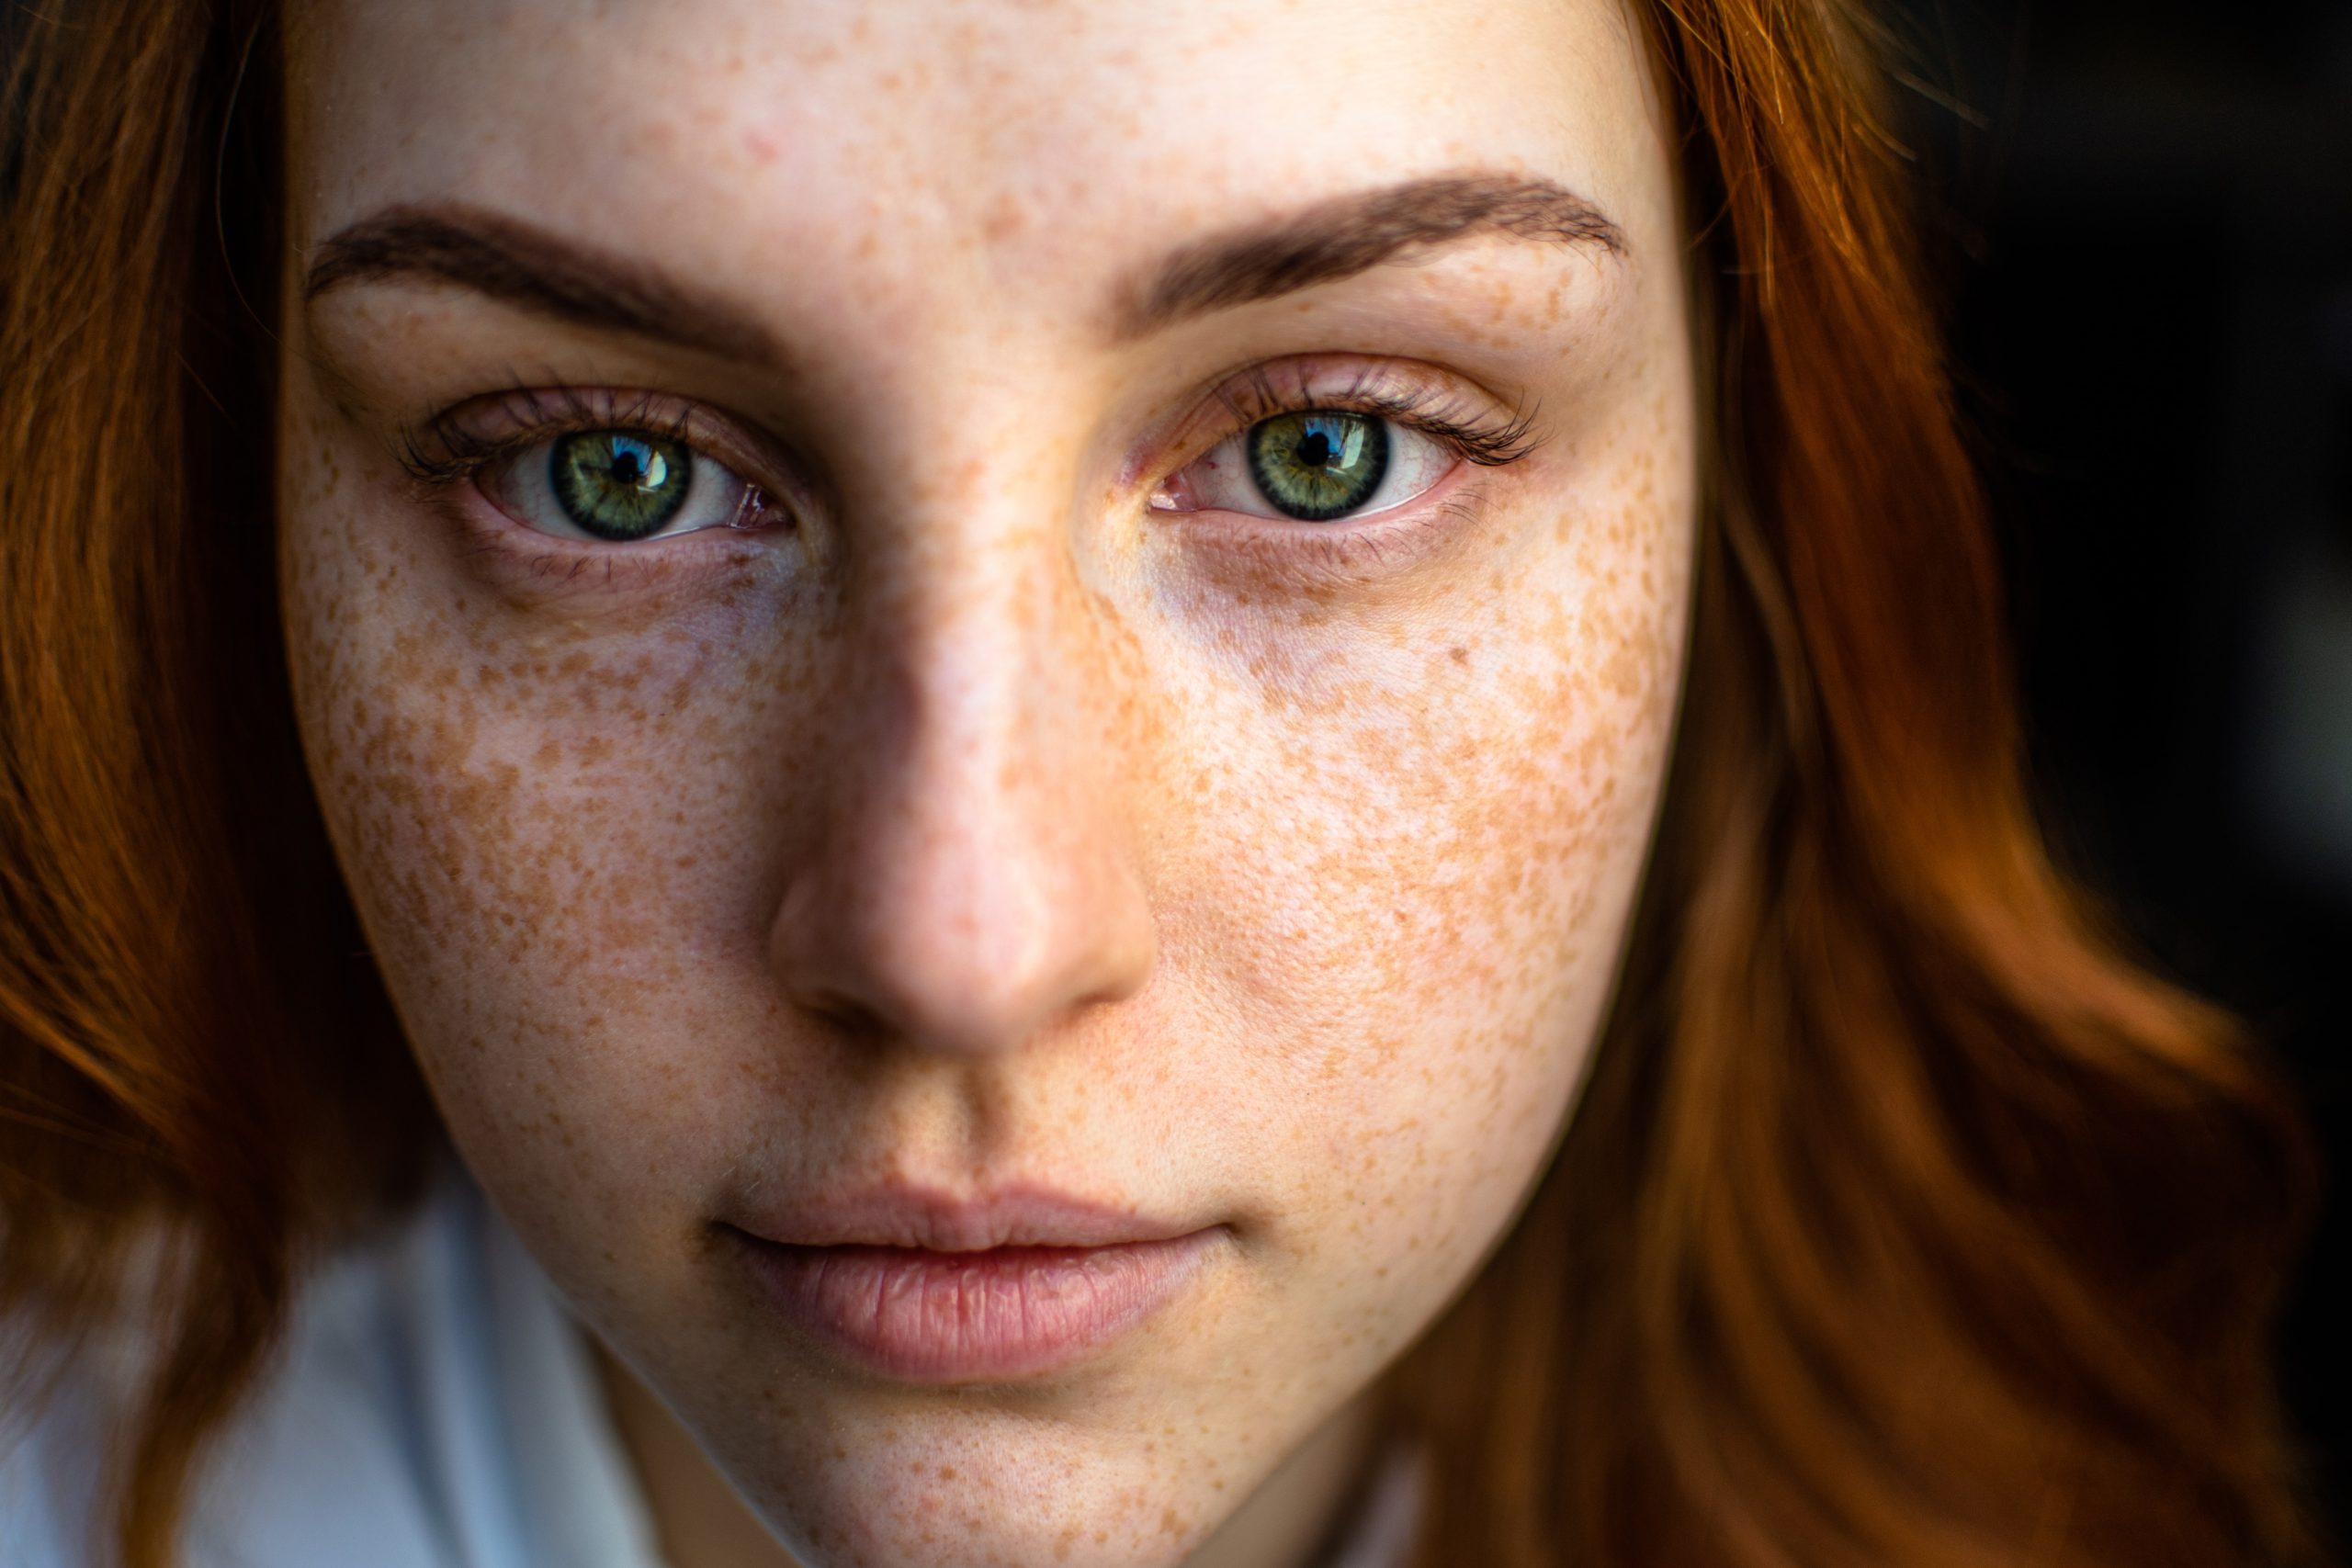 Here’s What’s Causing Acne on Every Part of Your Face